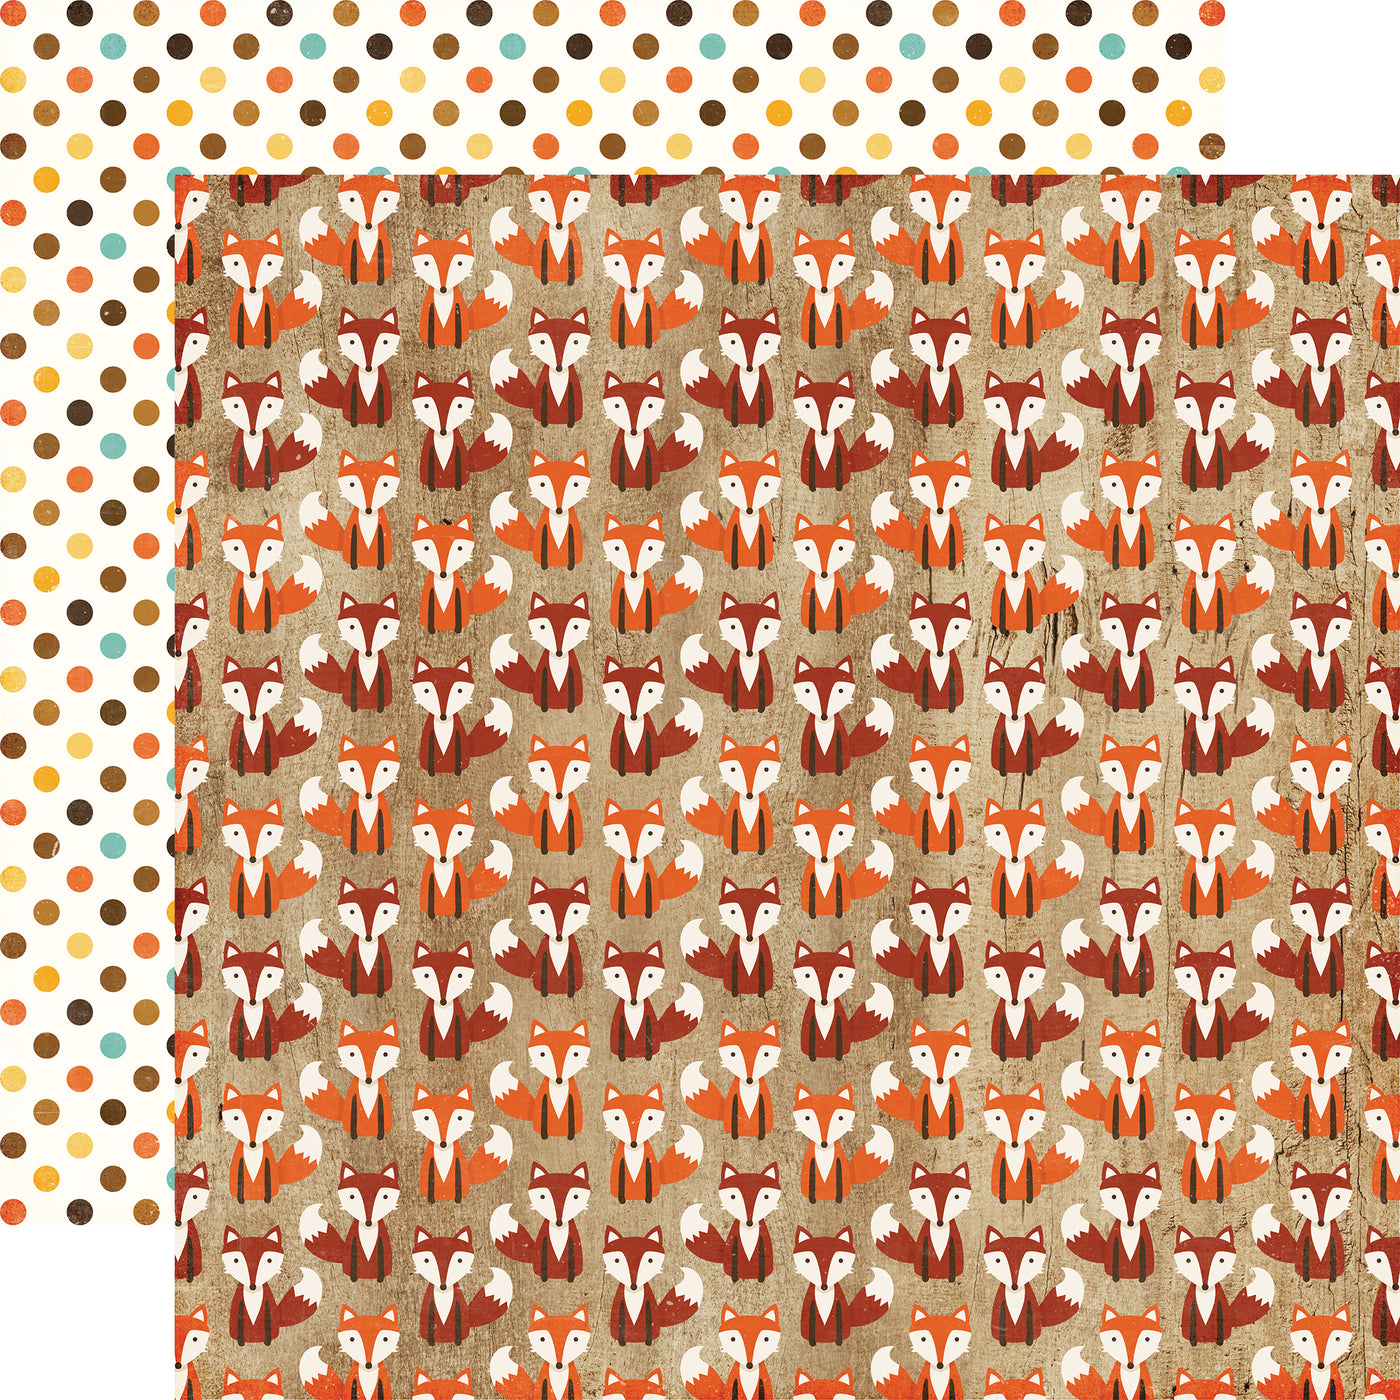 Multi-Colored (Side A - cute red and orange foxes on a brown wooden background, Side B - polka dots in fall colors on a cream background)